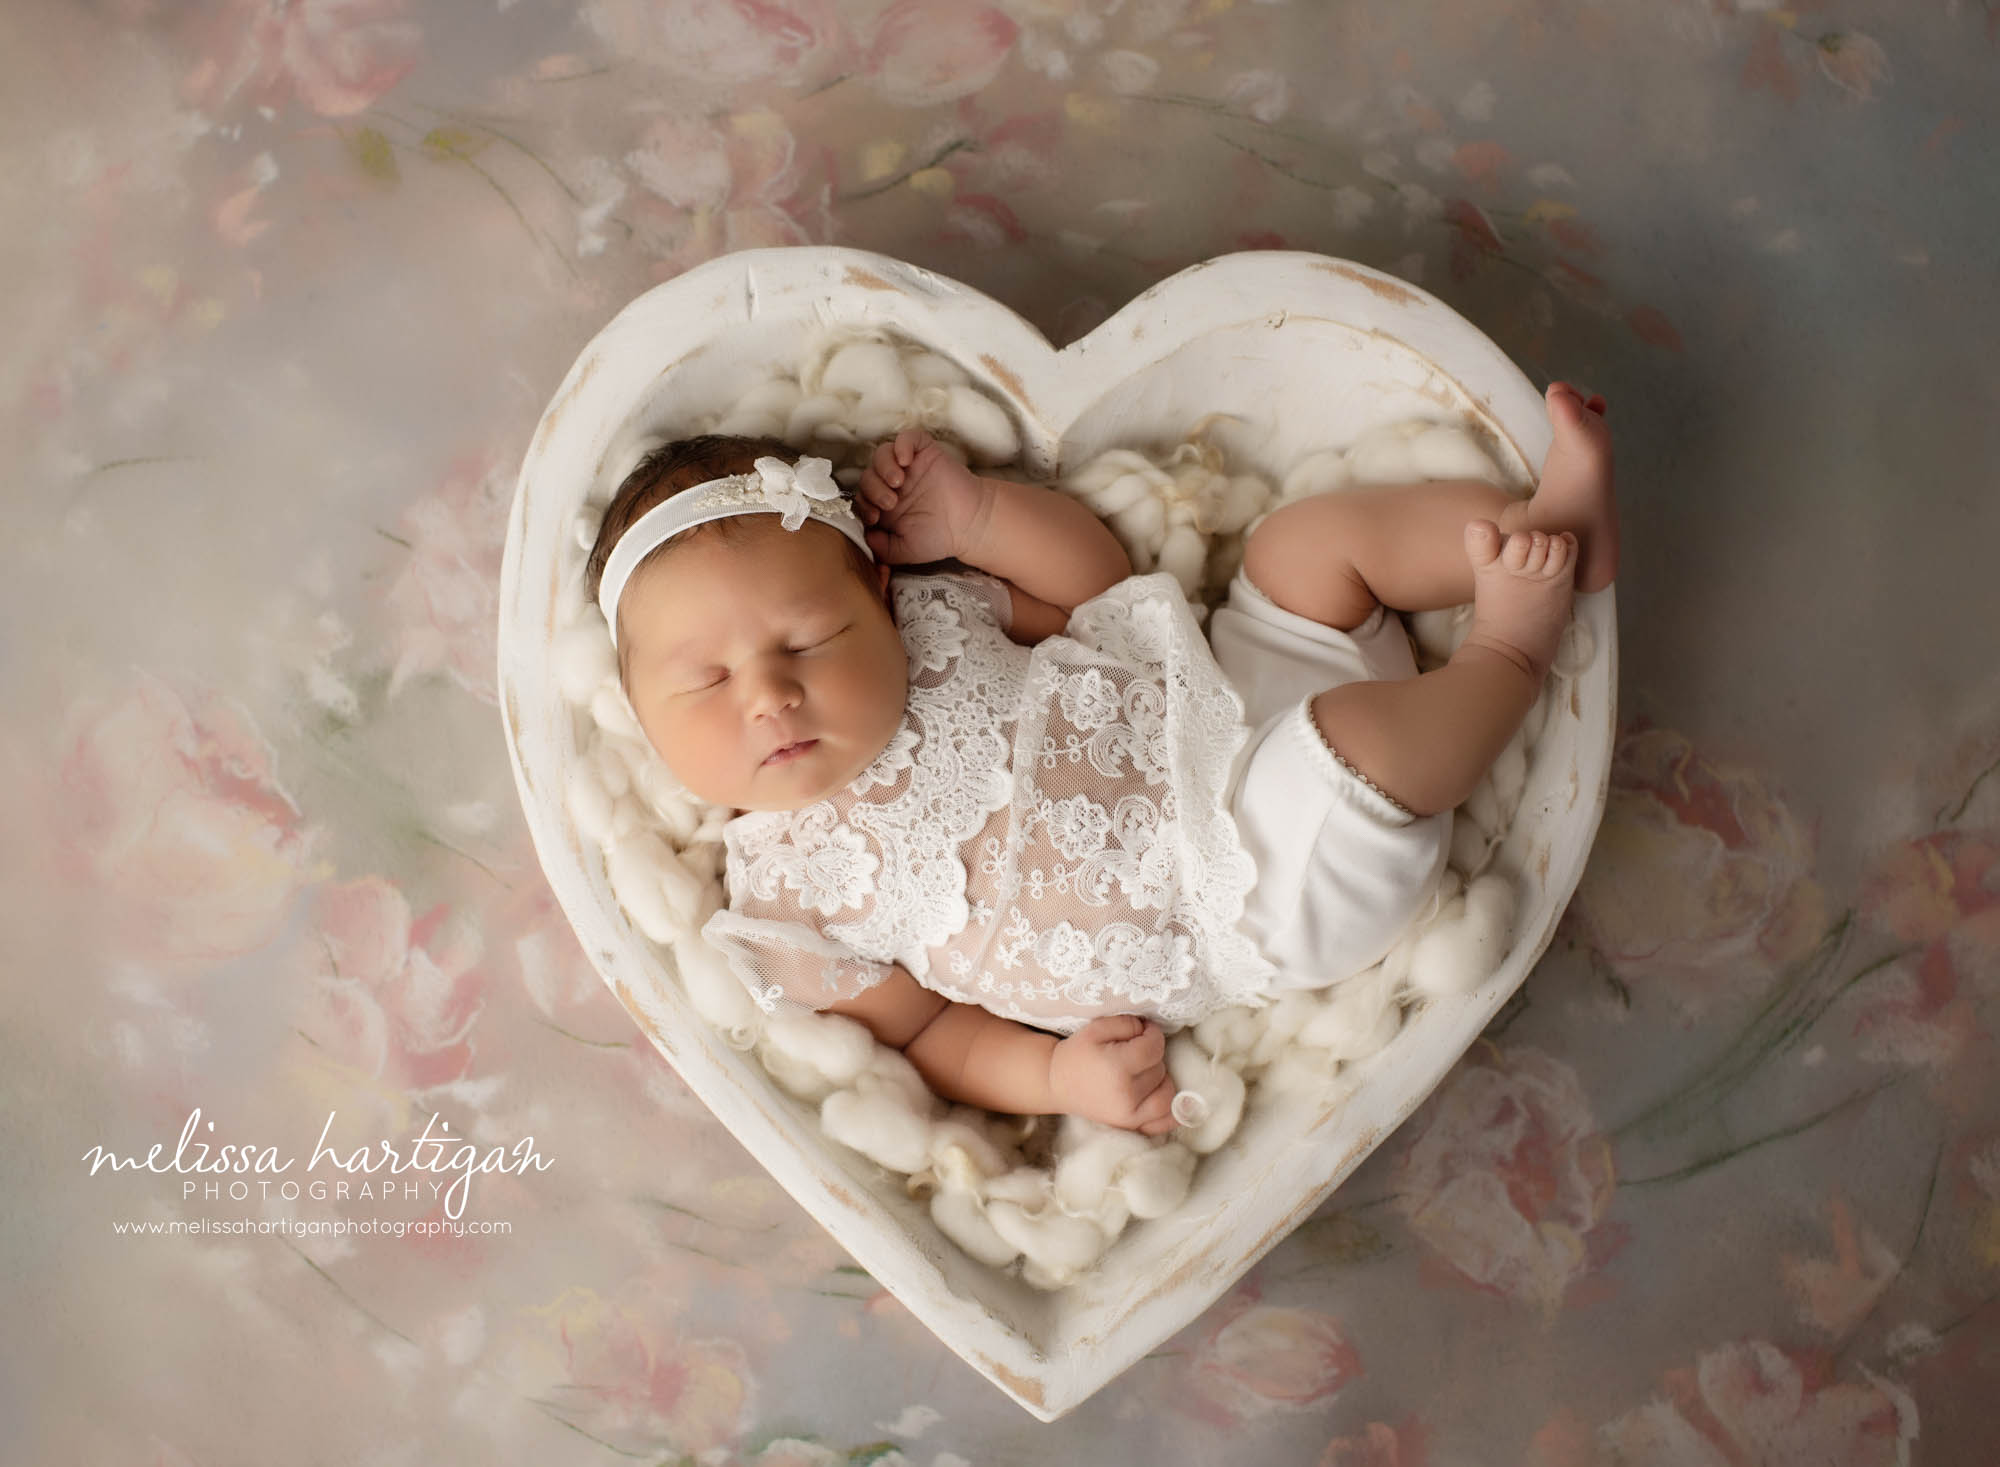 newborn baby girl posed in white wooden heart prop wearing lace outfit newborn photography hartford county